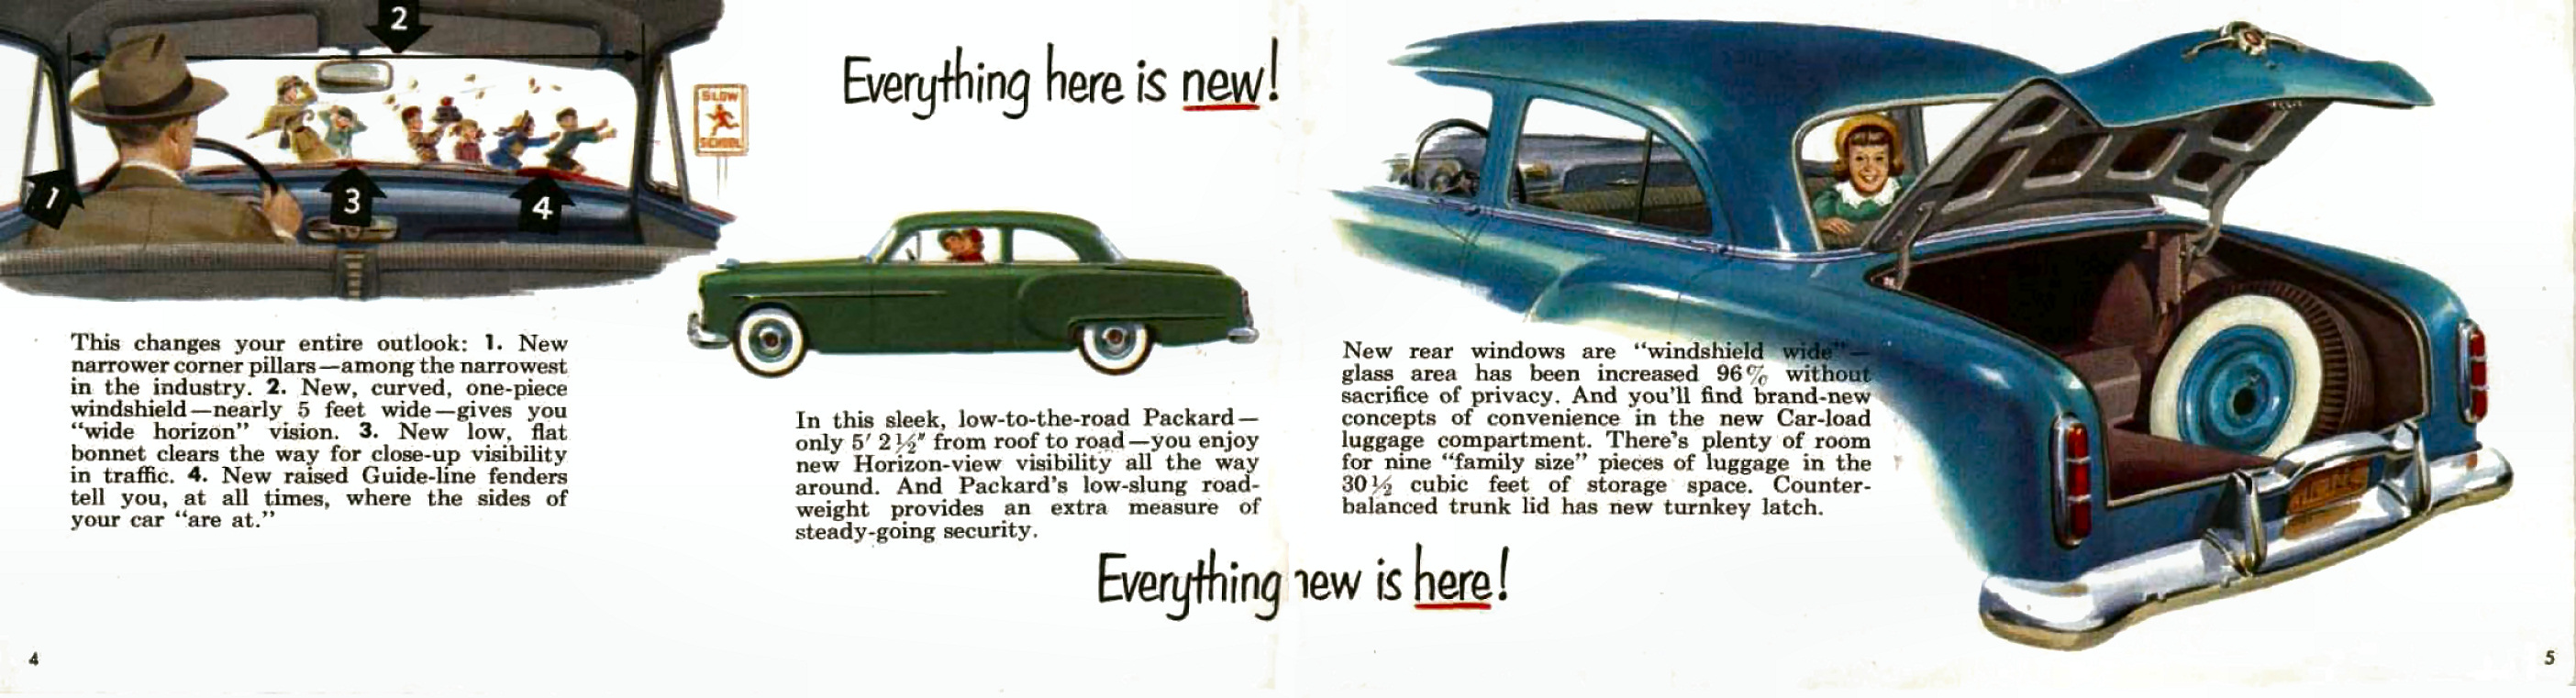 1951_Packard_One_for_51-04-05